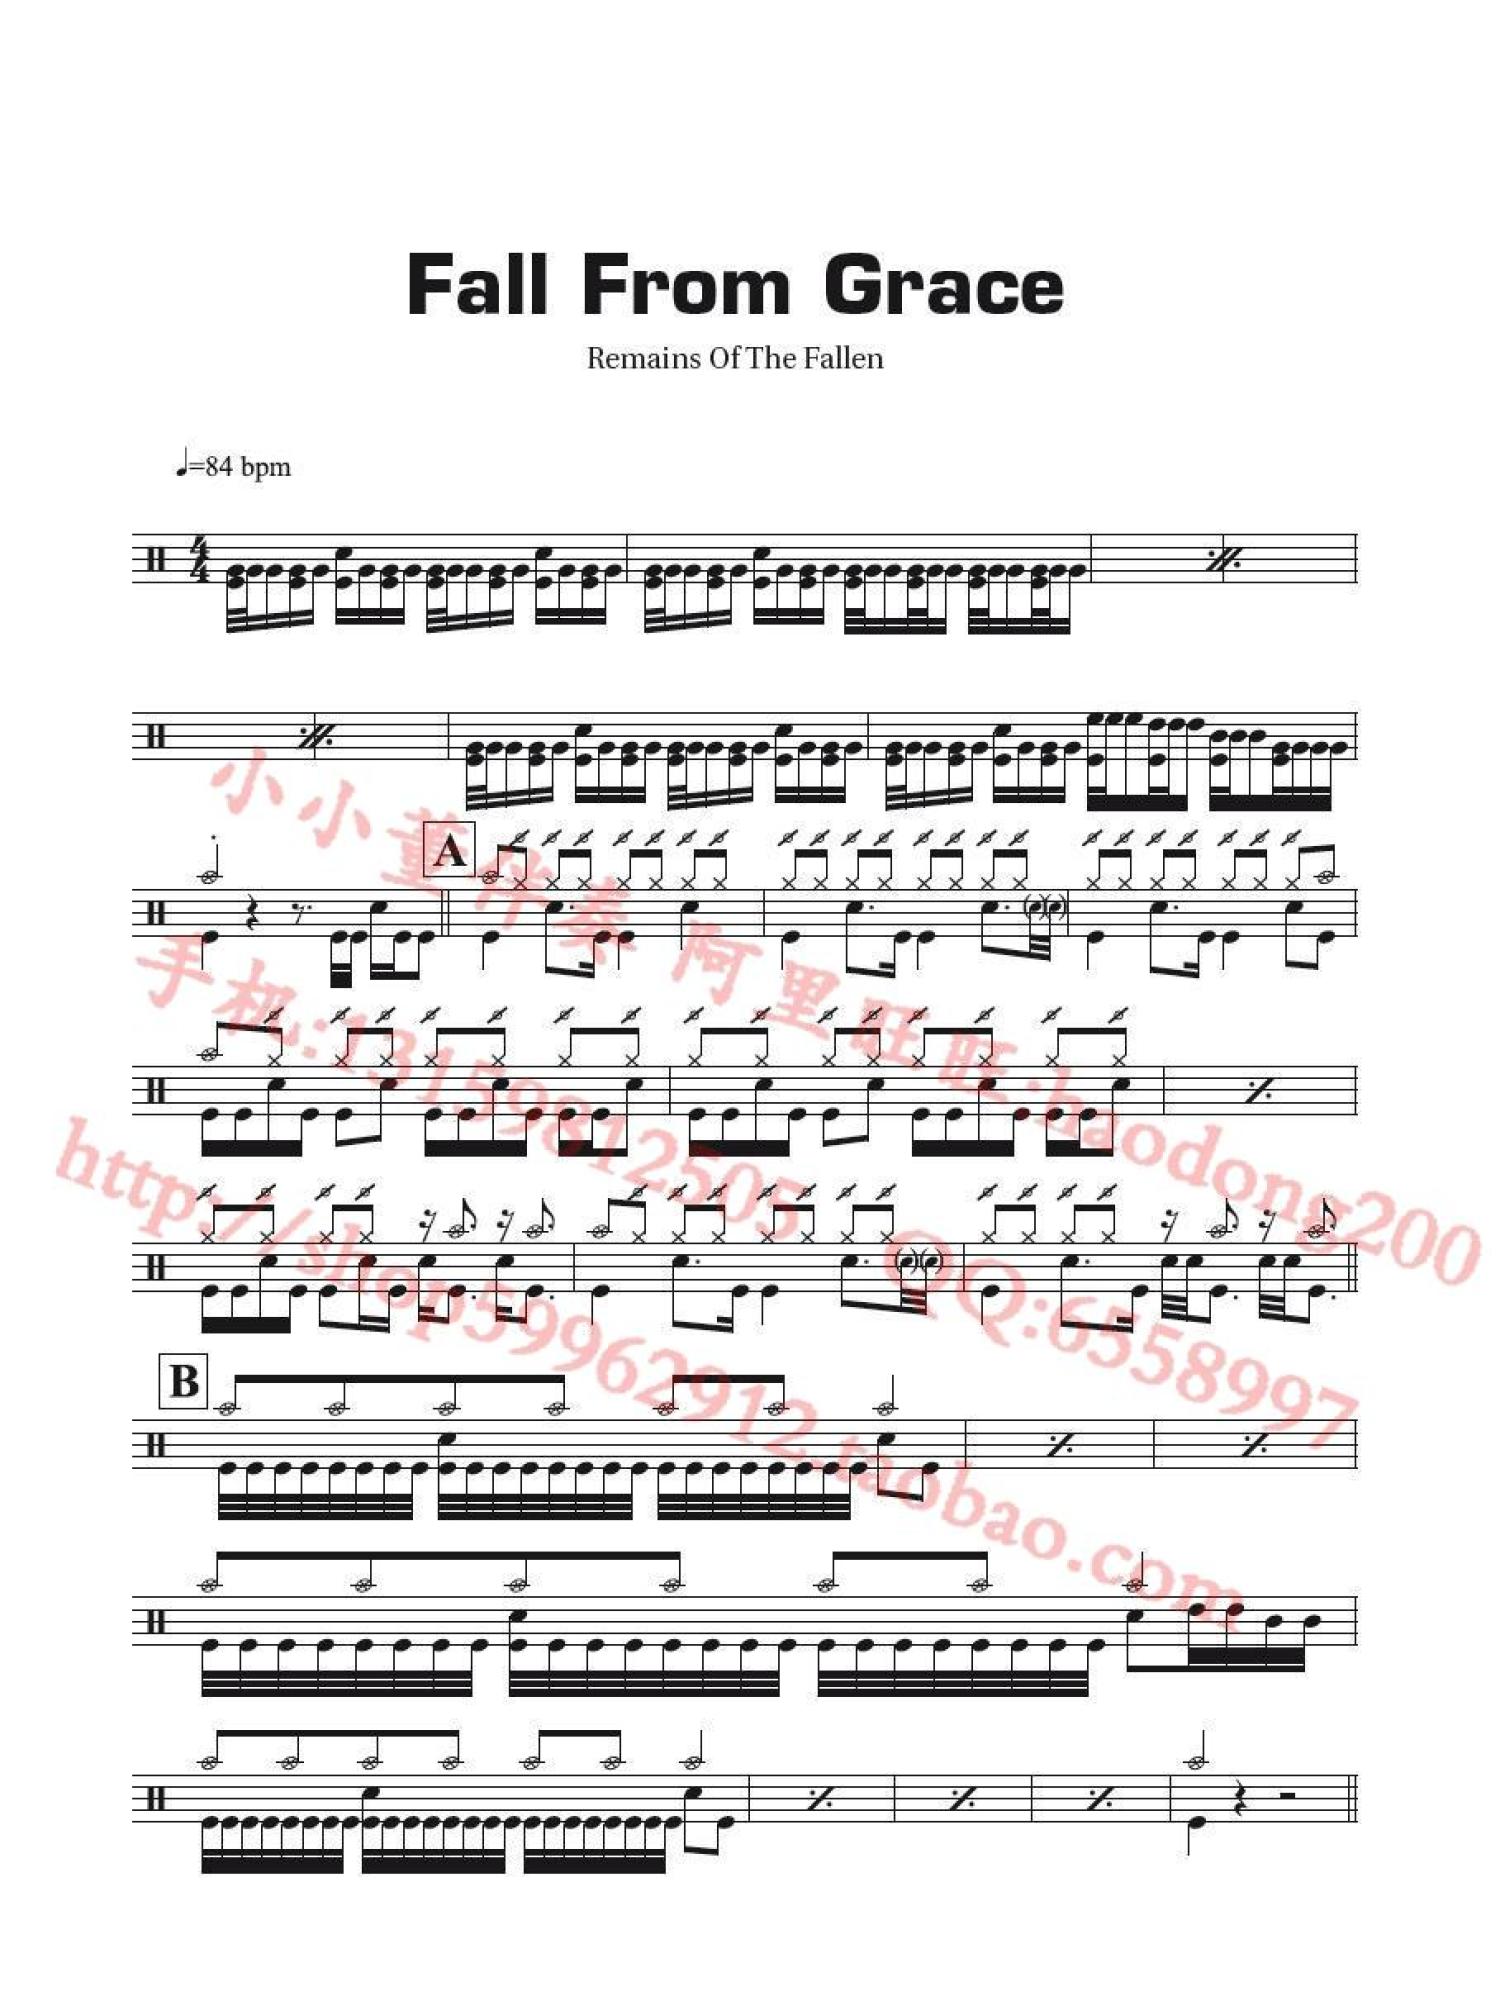 Remains Of The Fallen《Fall From Grace》鼓谱_架子鼓谱第1张